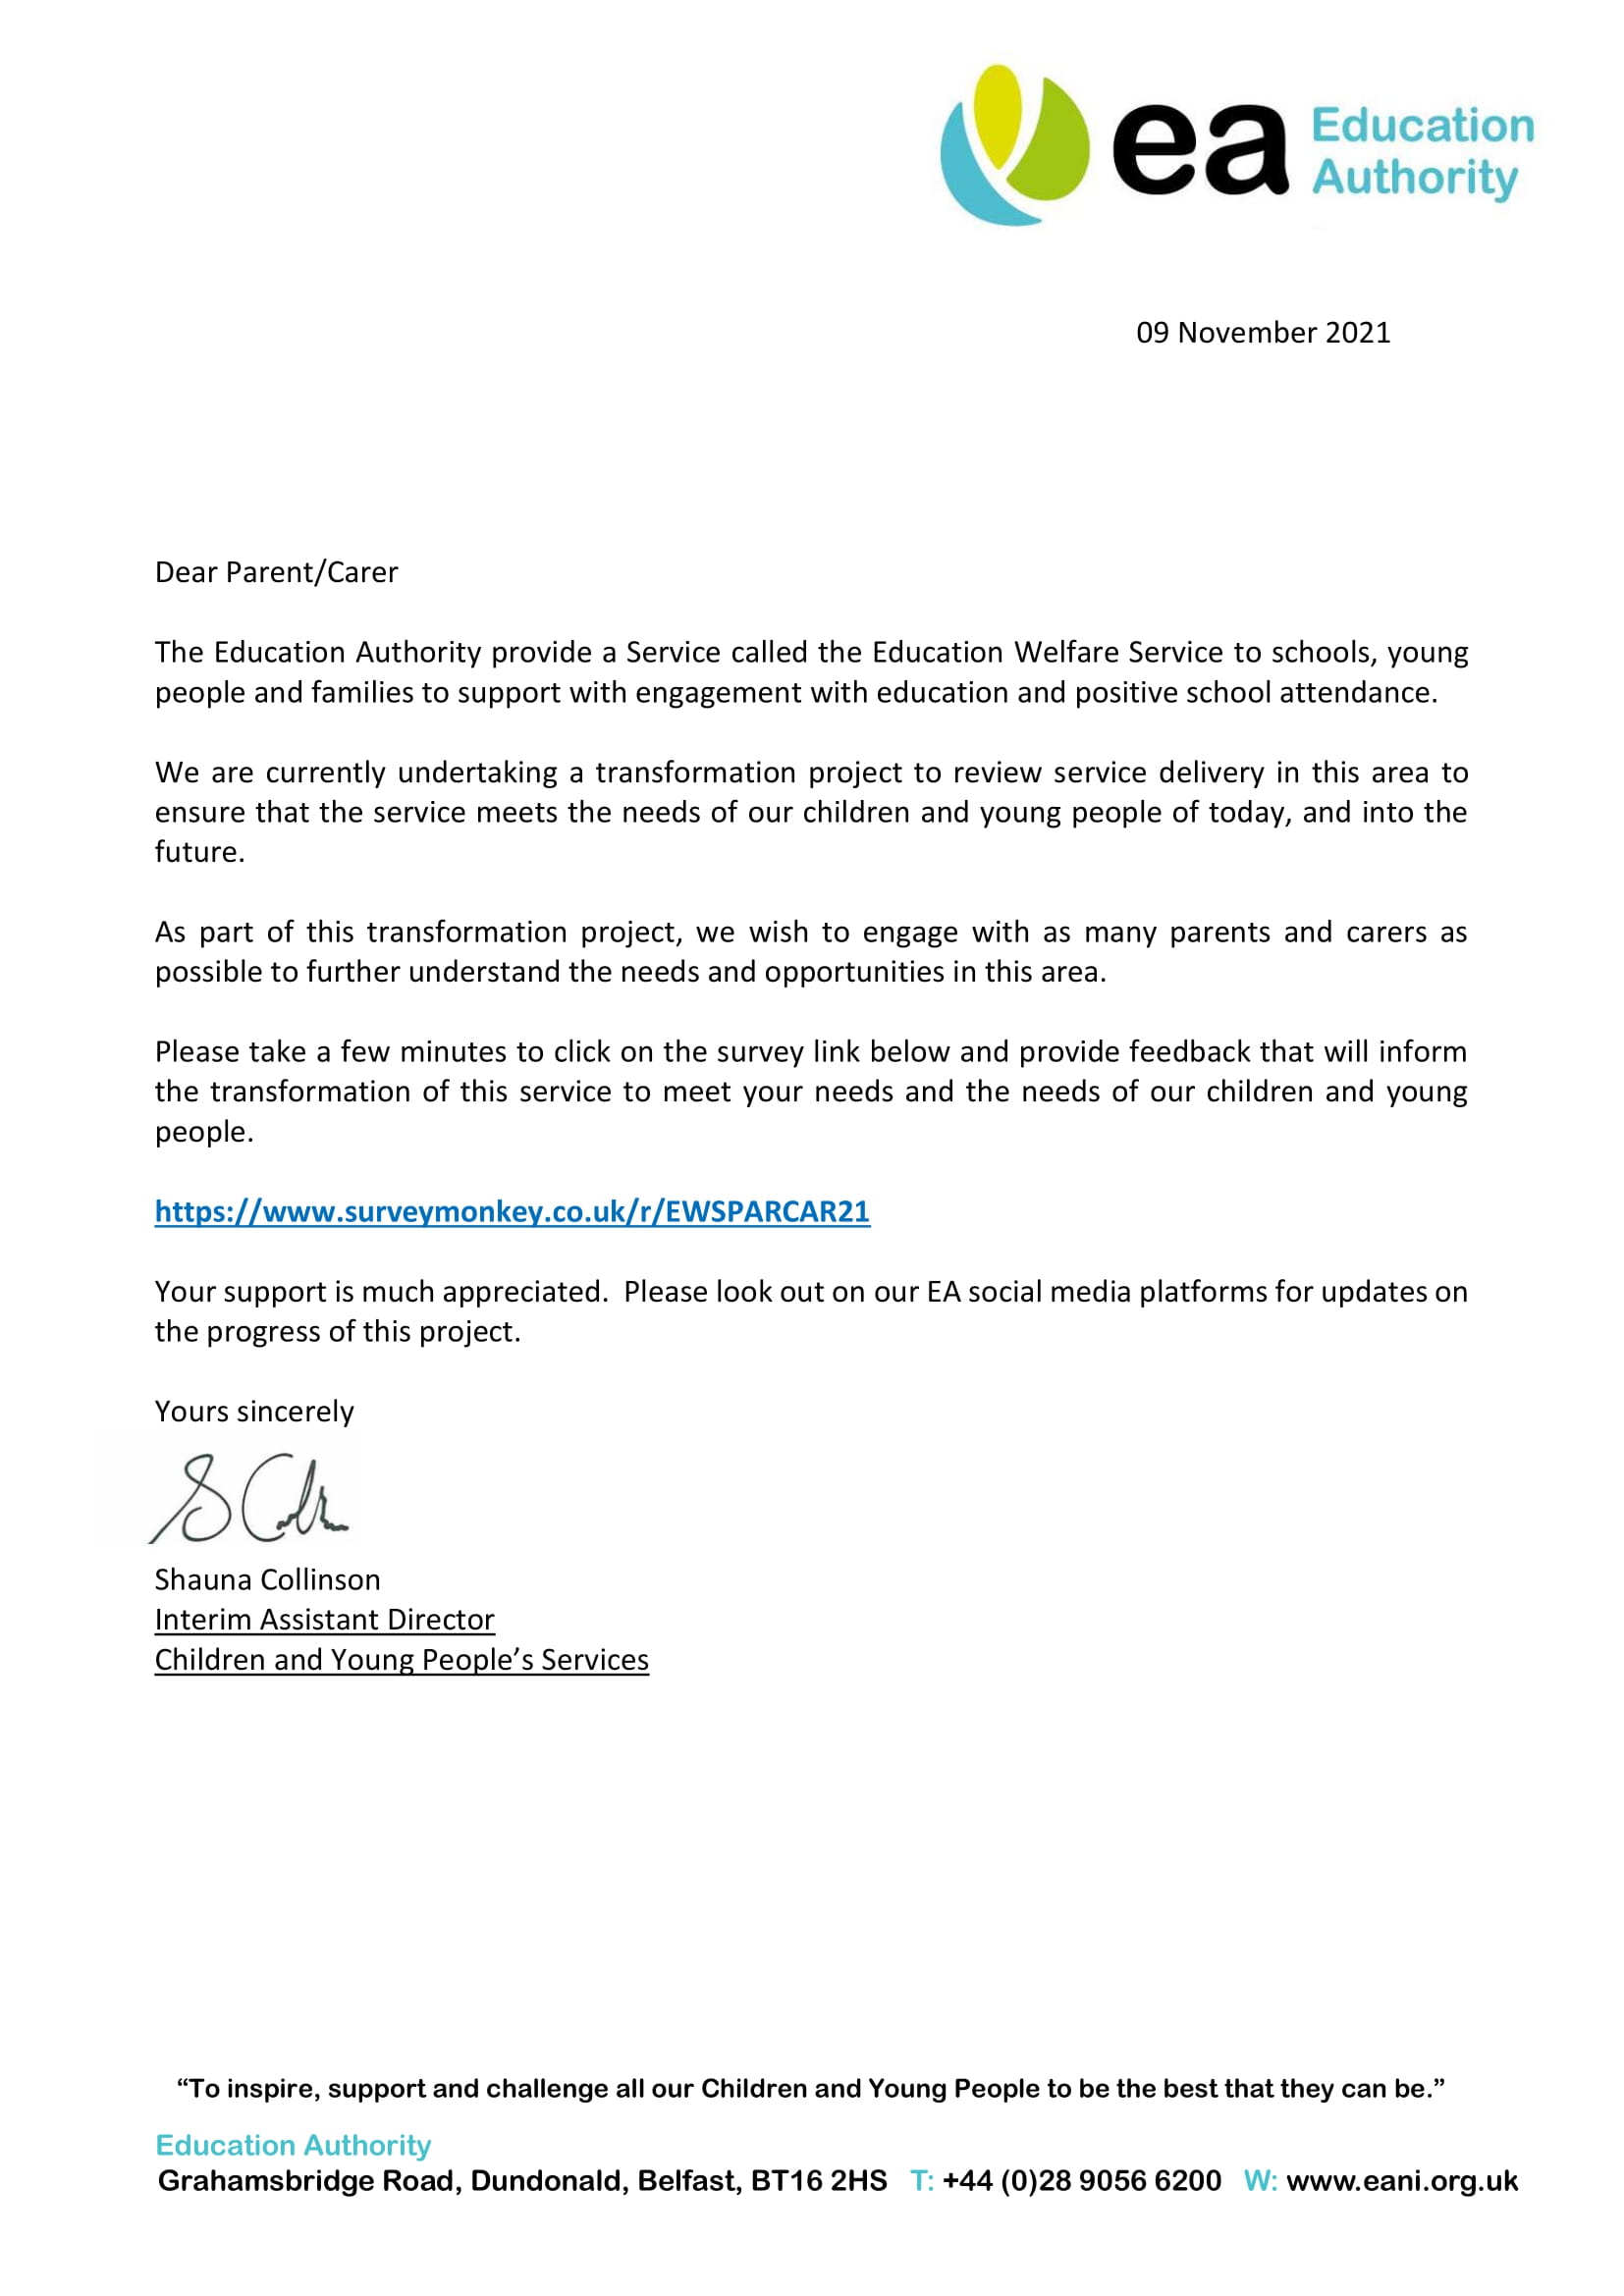 Letter to Parents/Carers on Education Welfare Service transformation